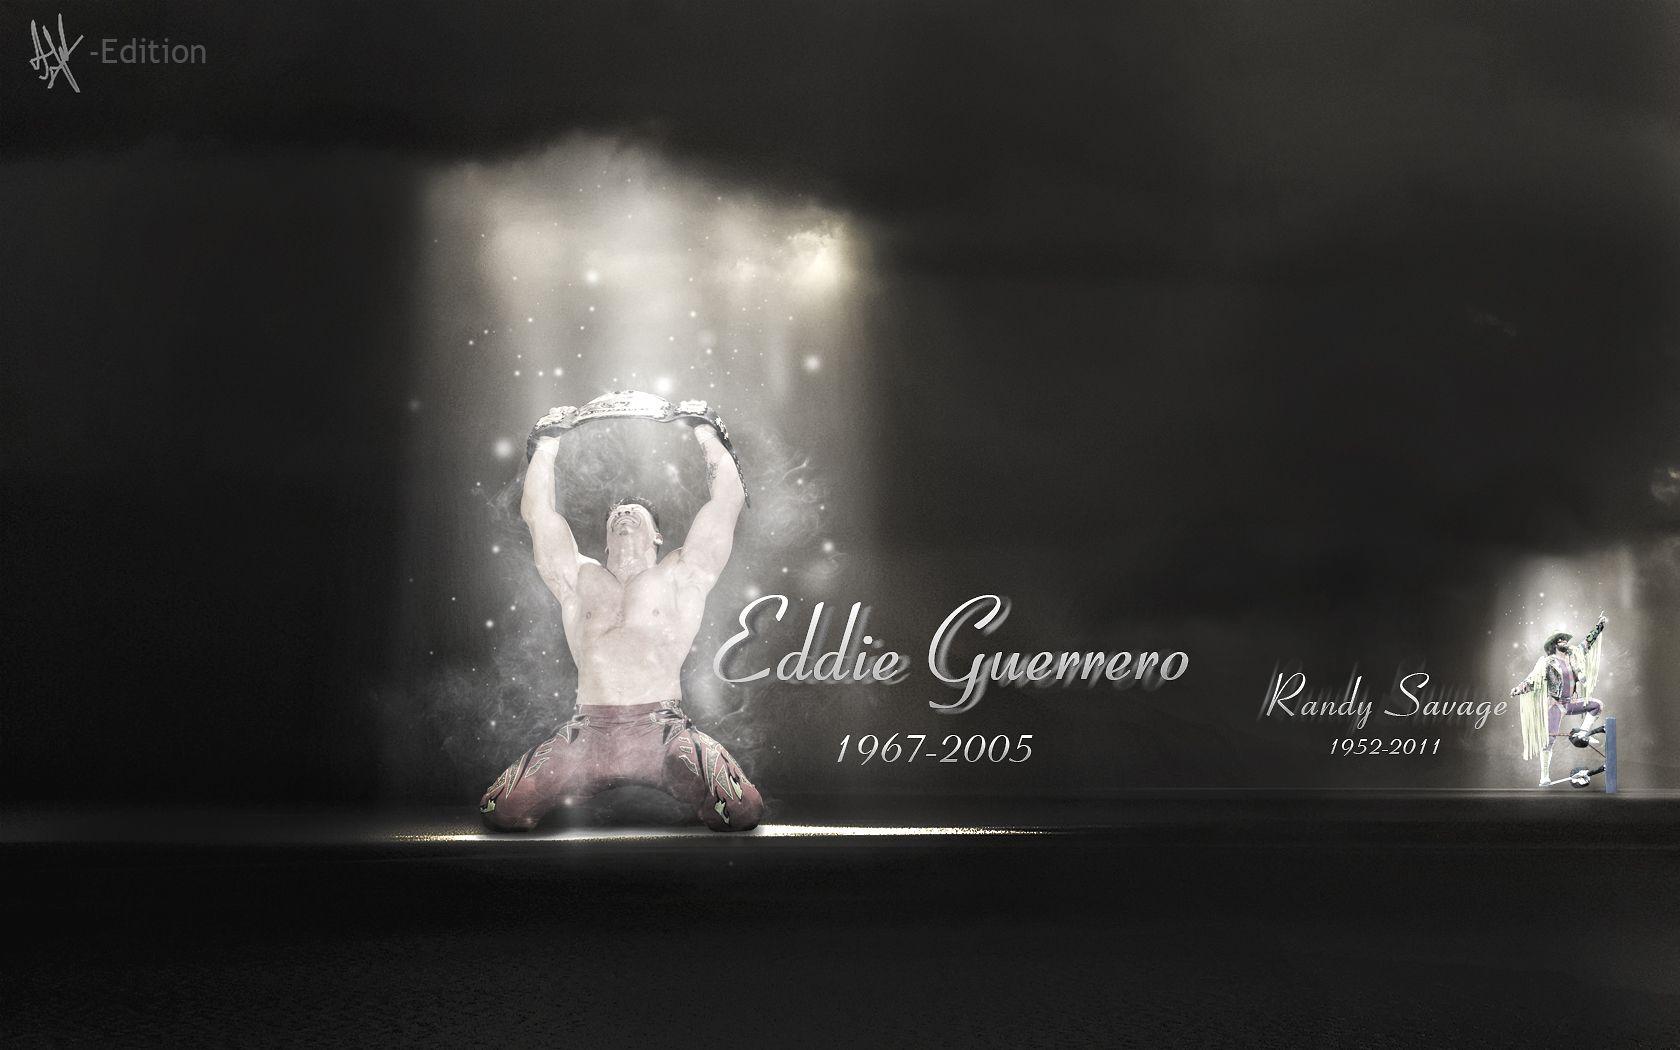 Eddie Guerrero Wallpaper 2013 AW Edition By AW Edition